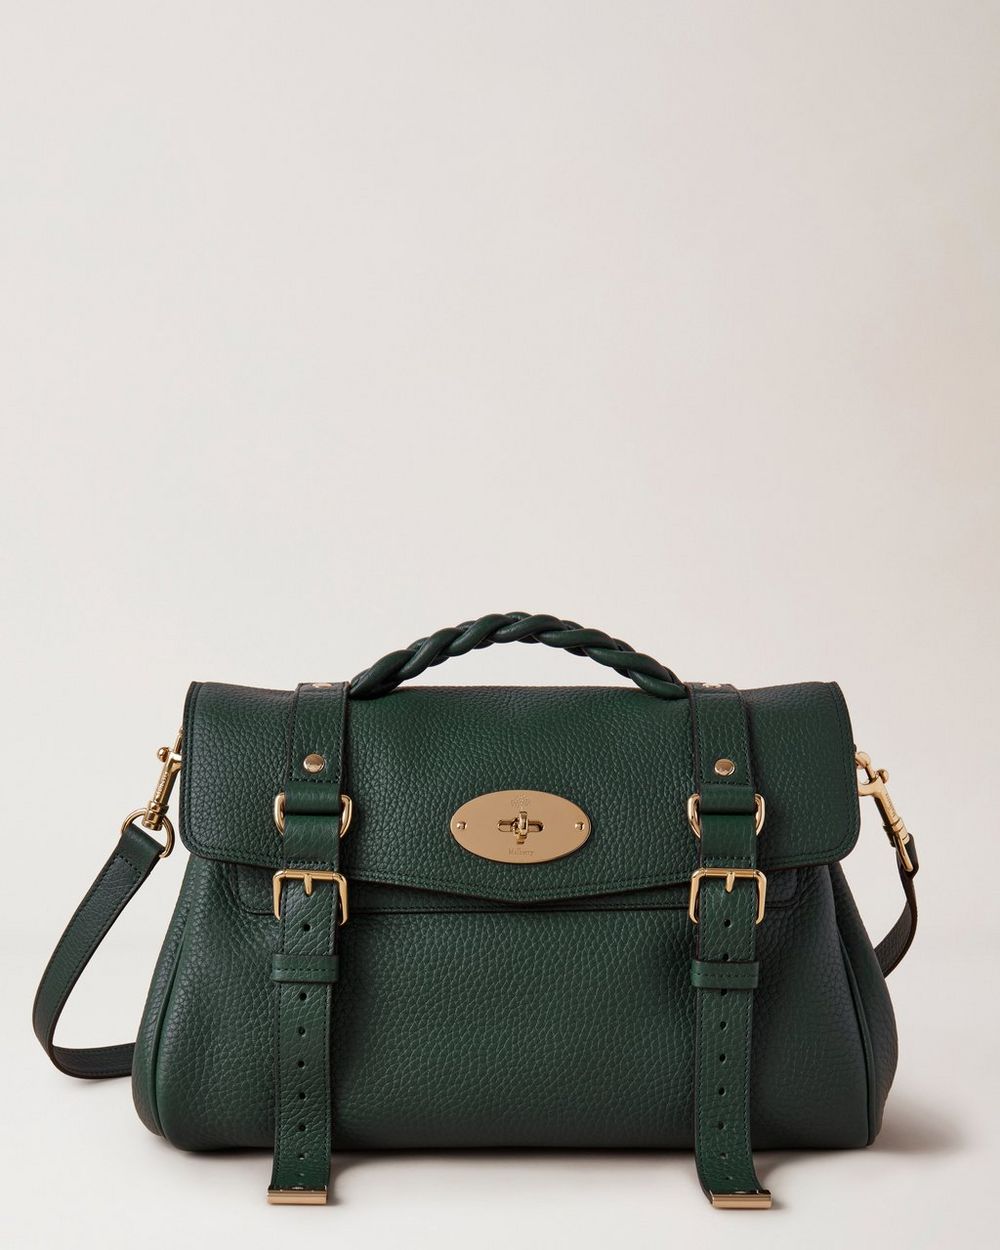 The Mulberry Exchange, Mulberry Green, Mulberry